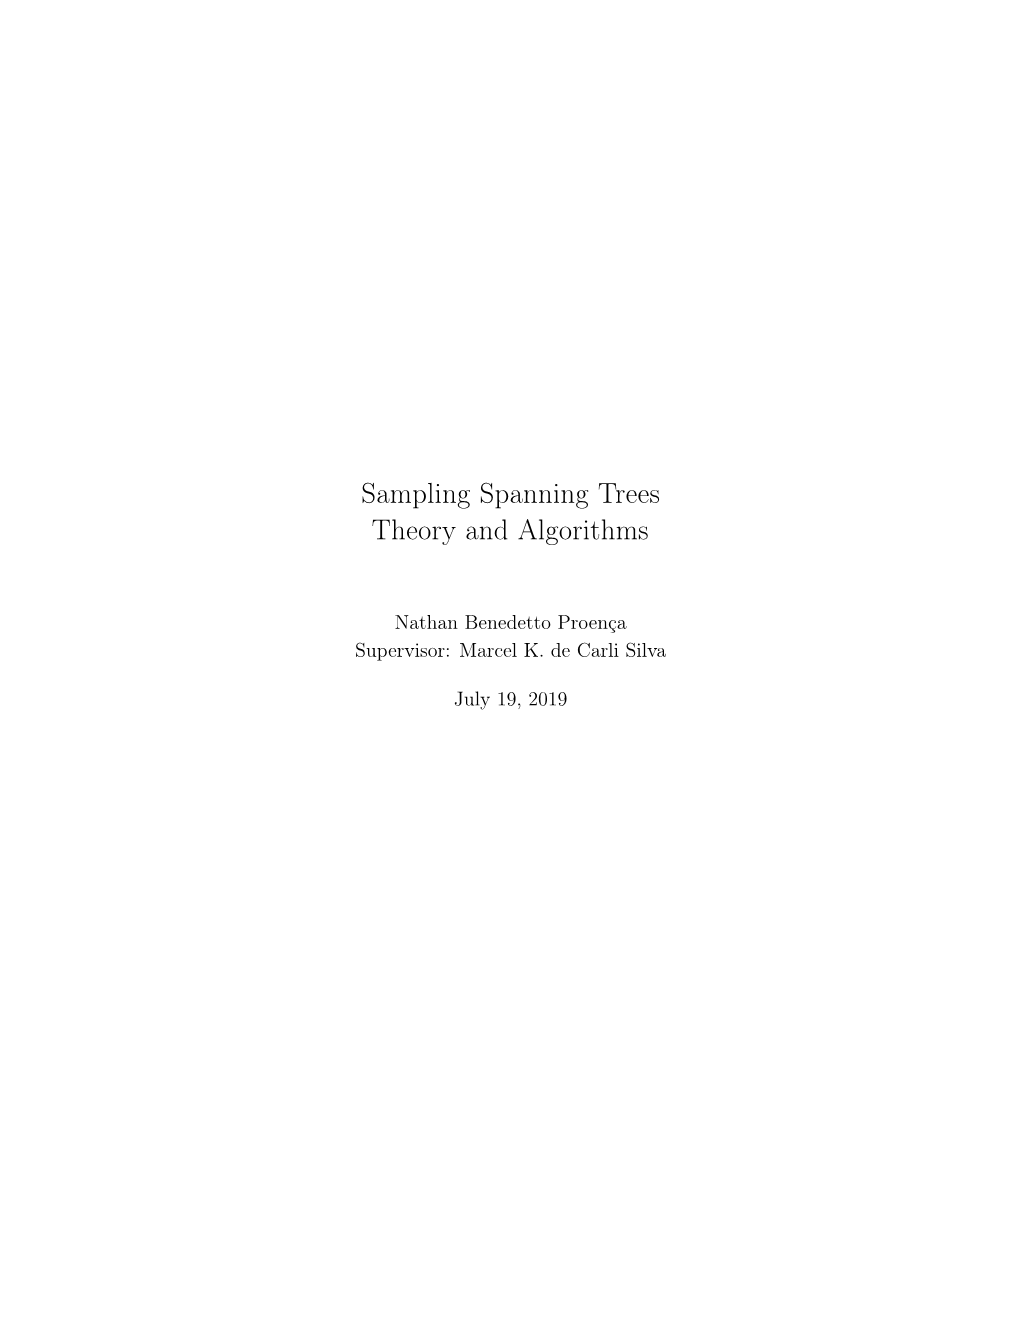 Sampling Spanning Trees Theory and Algorithms